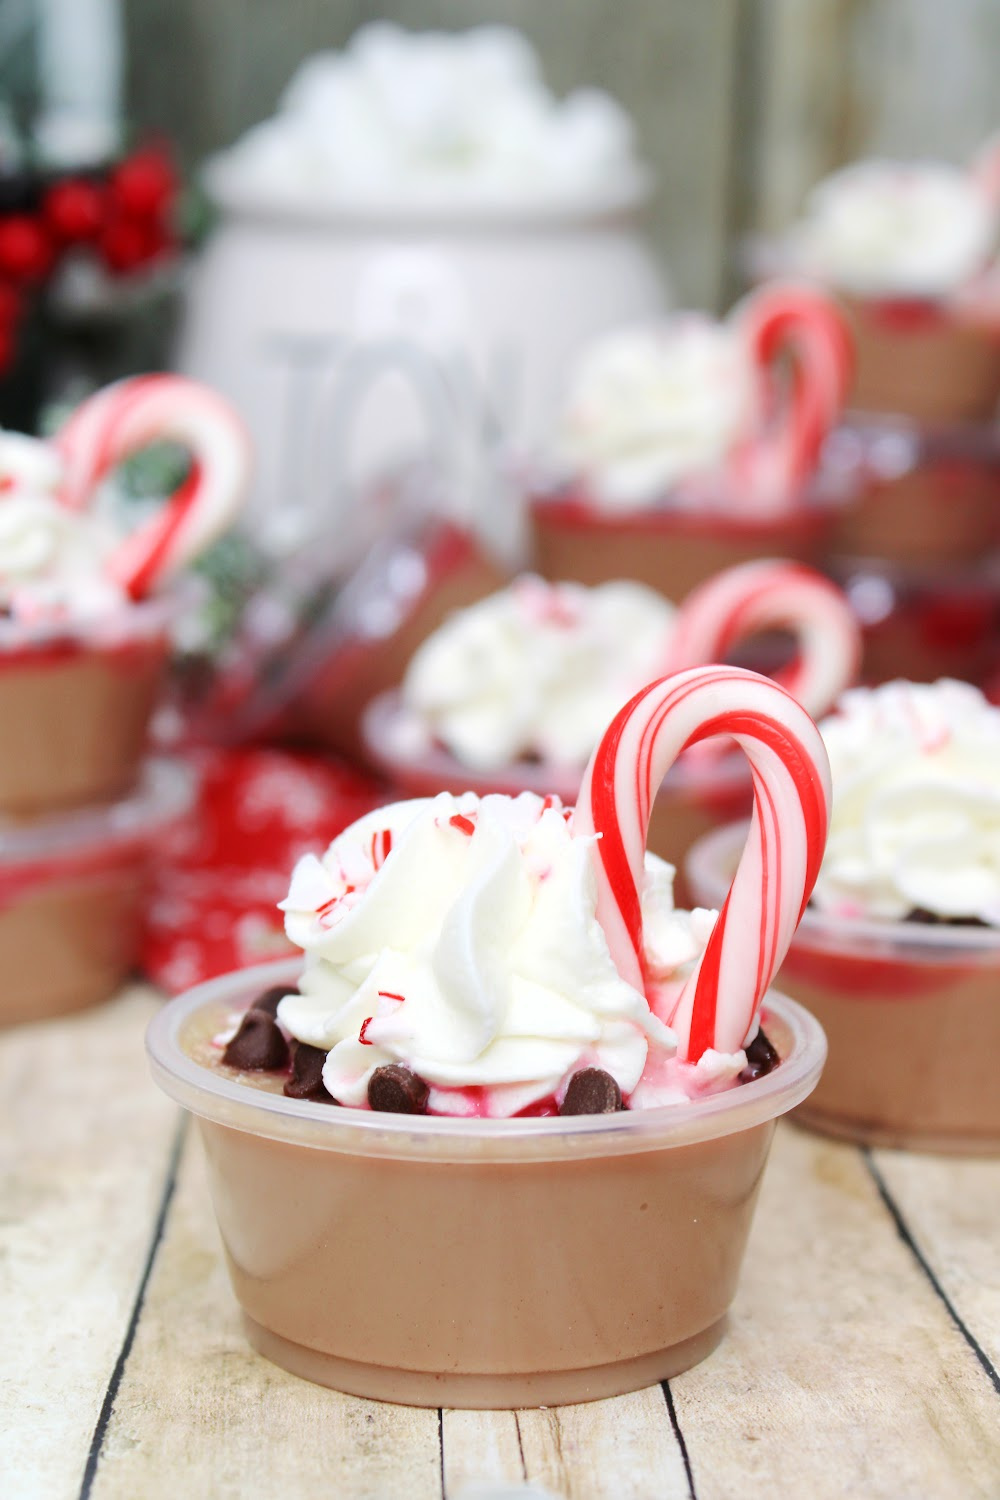 Flavors of hot chocolate and peppermint garnished with a mini candy cane are the perfect Christmas jello shot!